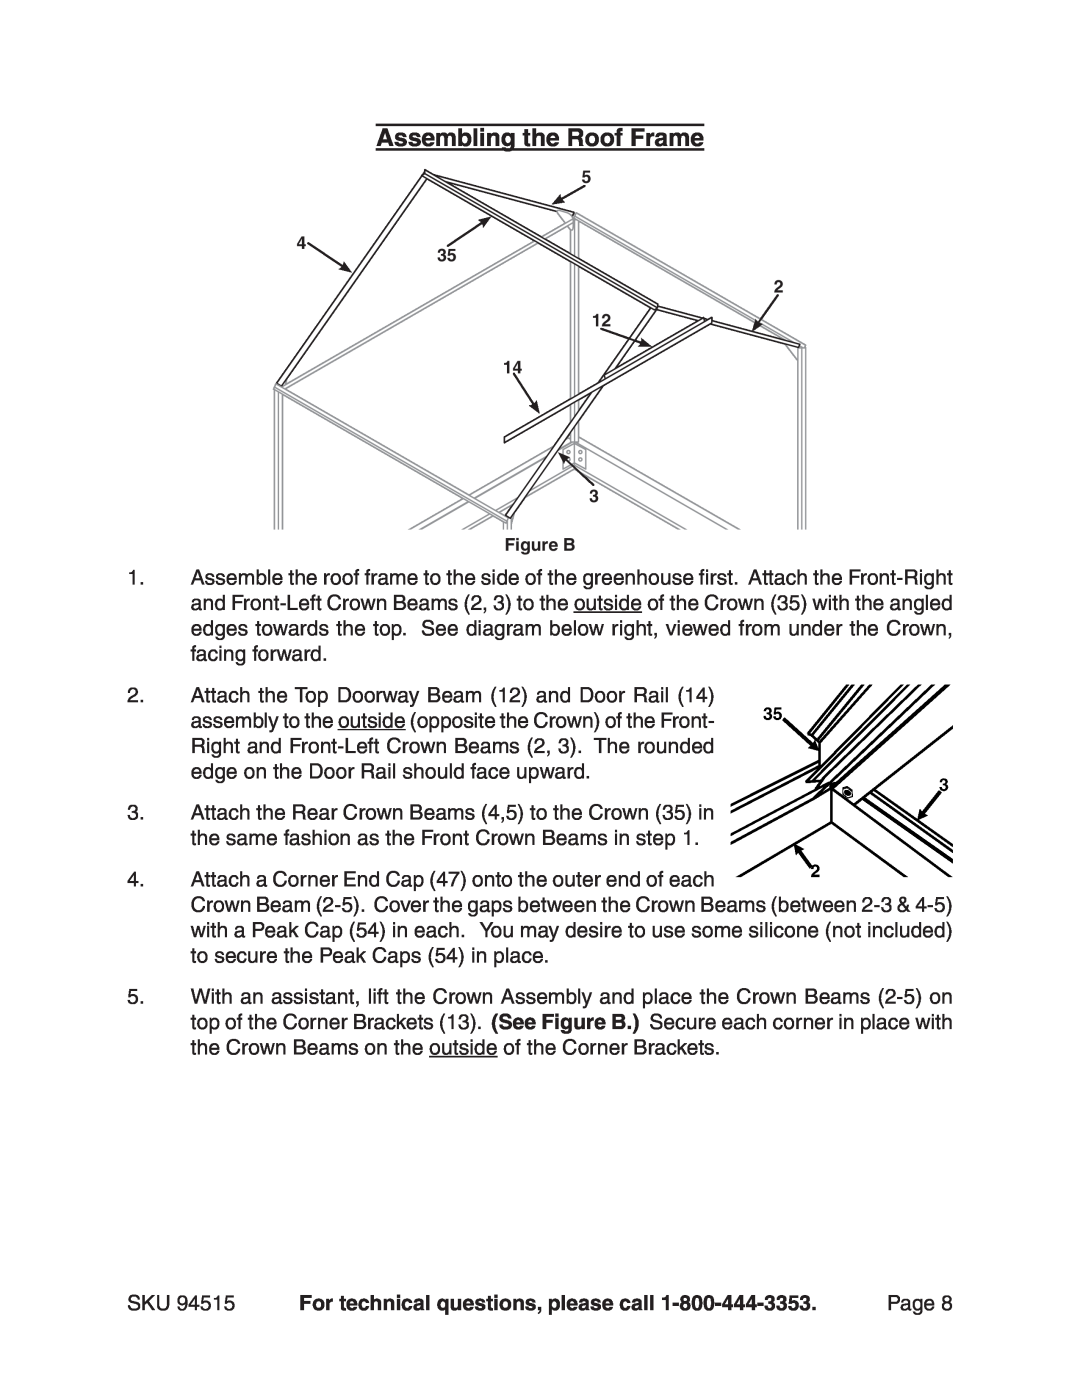 Harbor Freight Tools 94515 manual Assembling the Roof Frame, For technical questions, please call 